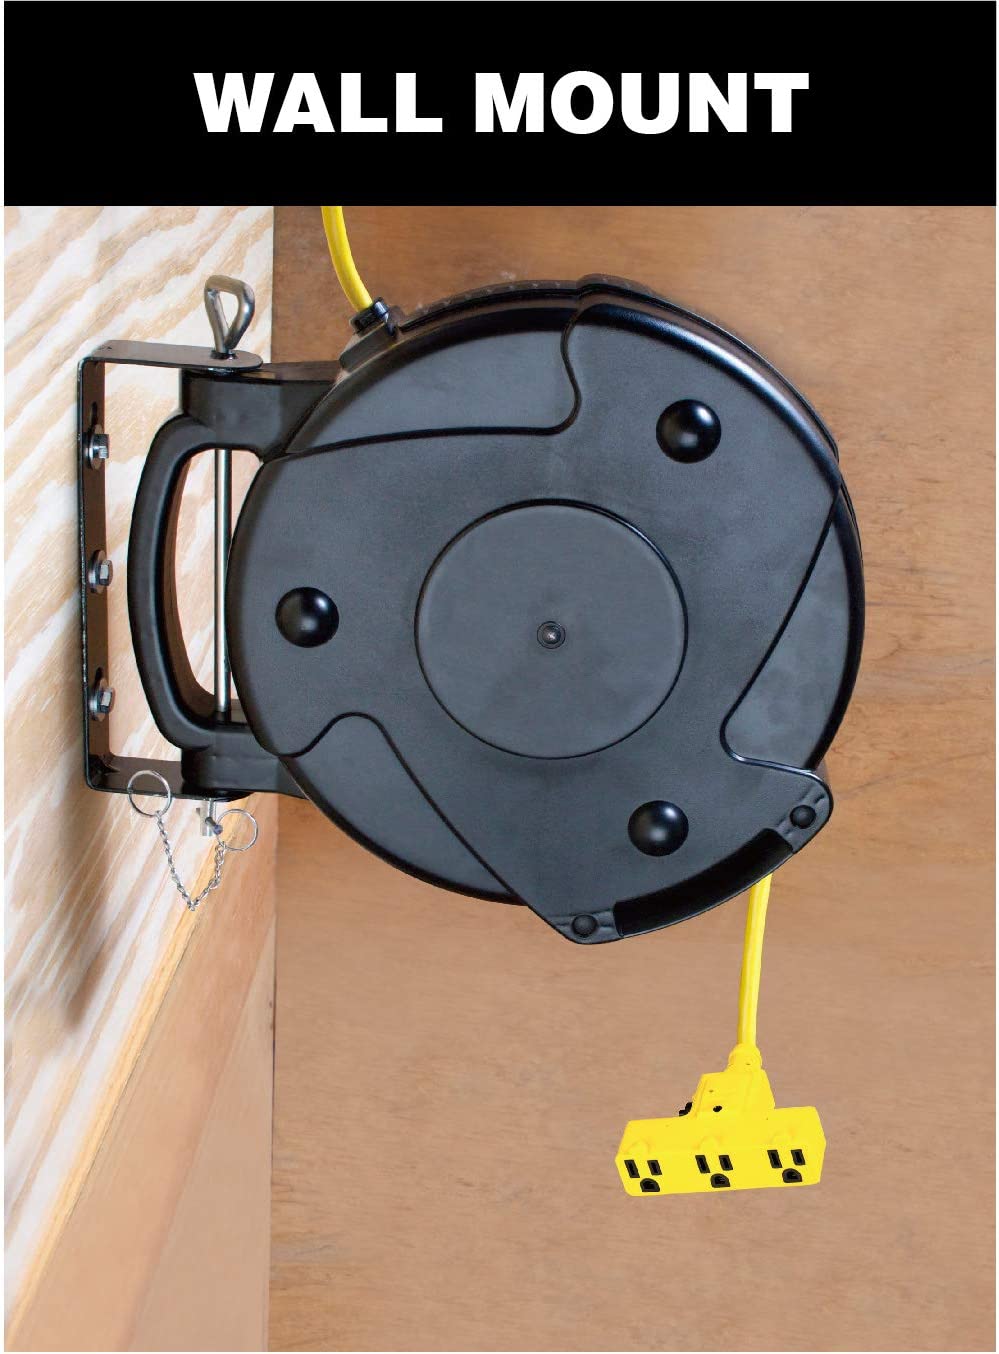 WALL MOUNT CORD REEL WITH EXTENSION CORD.